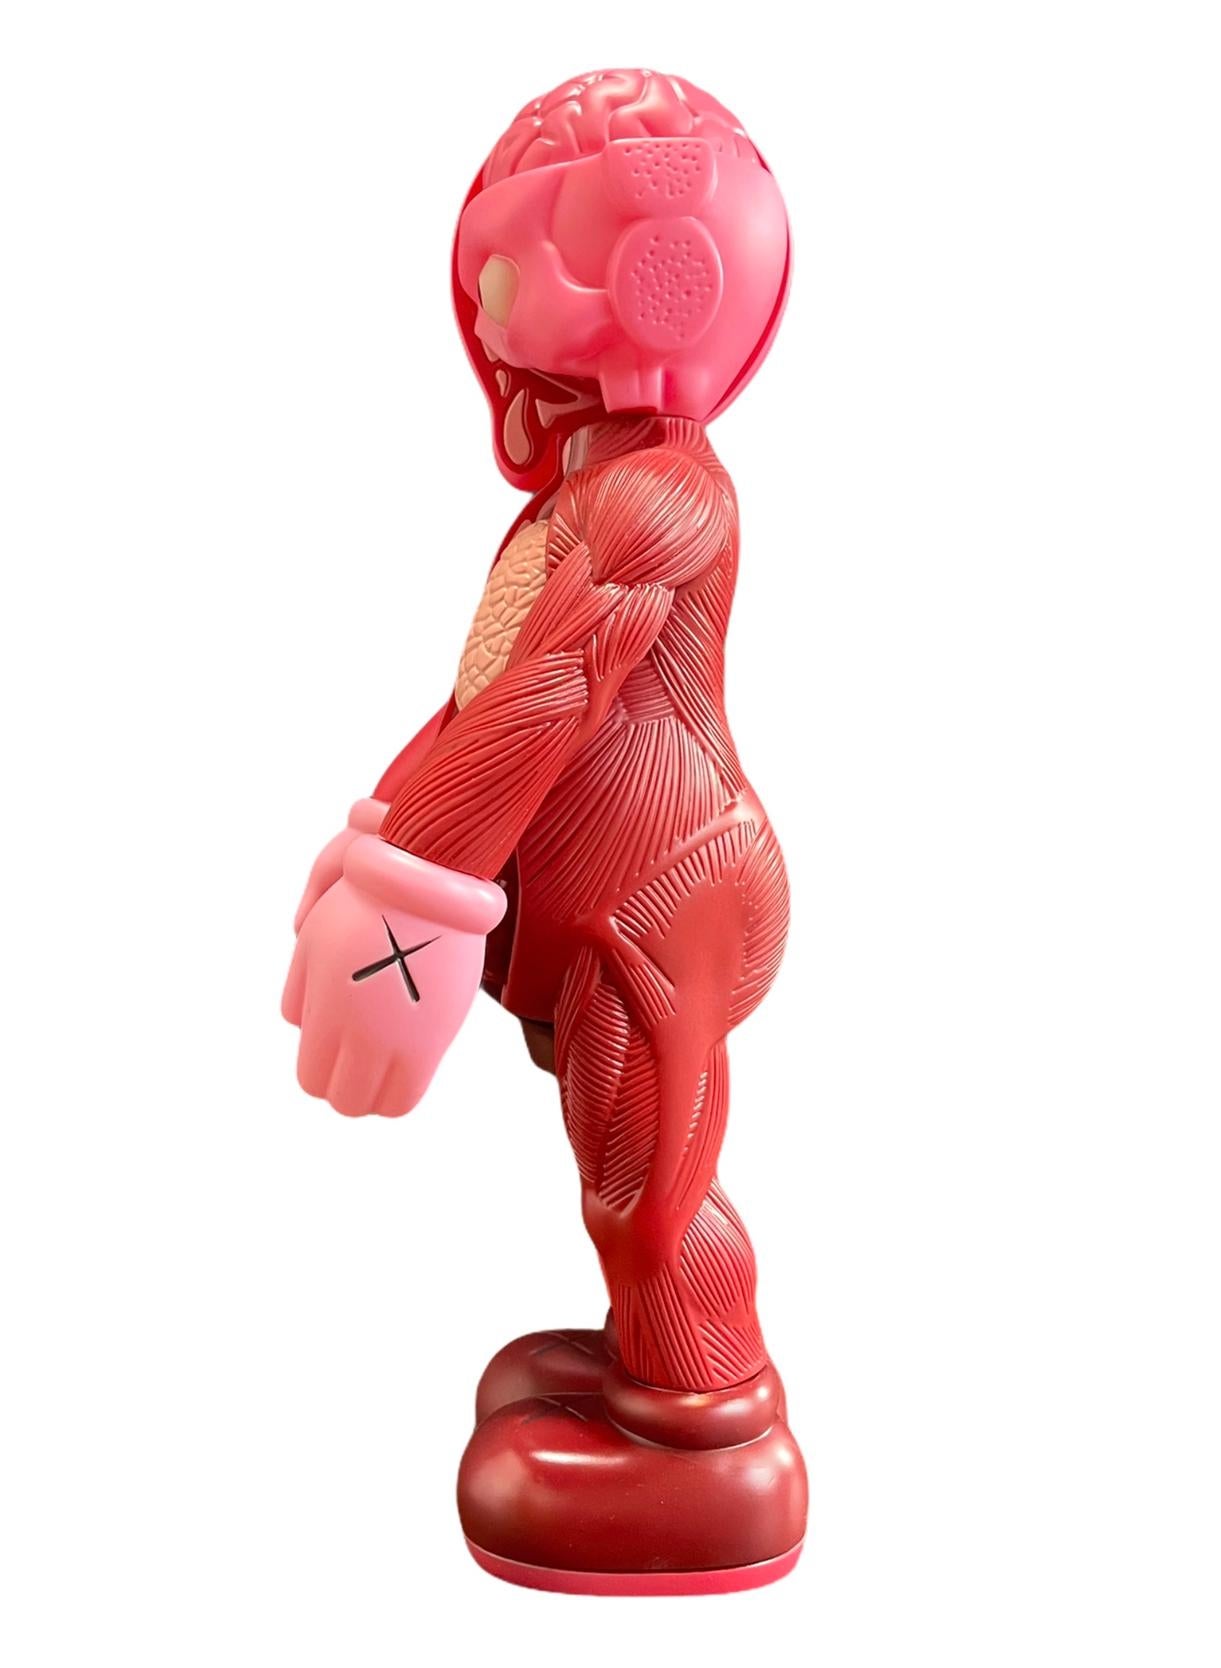 KAWS Red Blush Companion, 2016:
New. Published by Medicom Japan in conjunction with the exhibition, KAWS: Where The End Starts at the Modern Art Museum of Fort Worth. ThIs figurine has since sold out.

Kaws, otherwise known as Brian Donnelley,